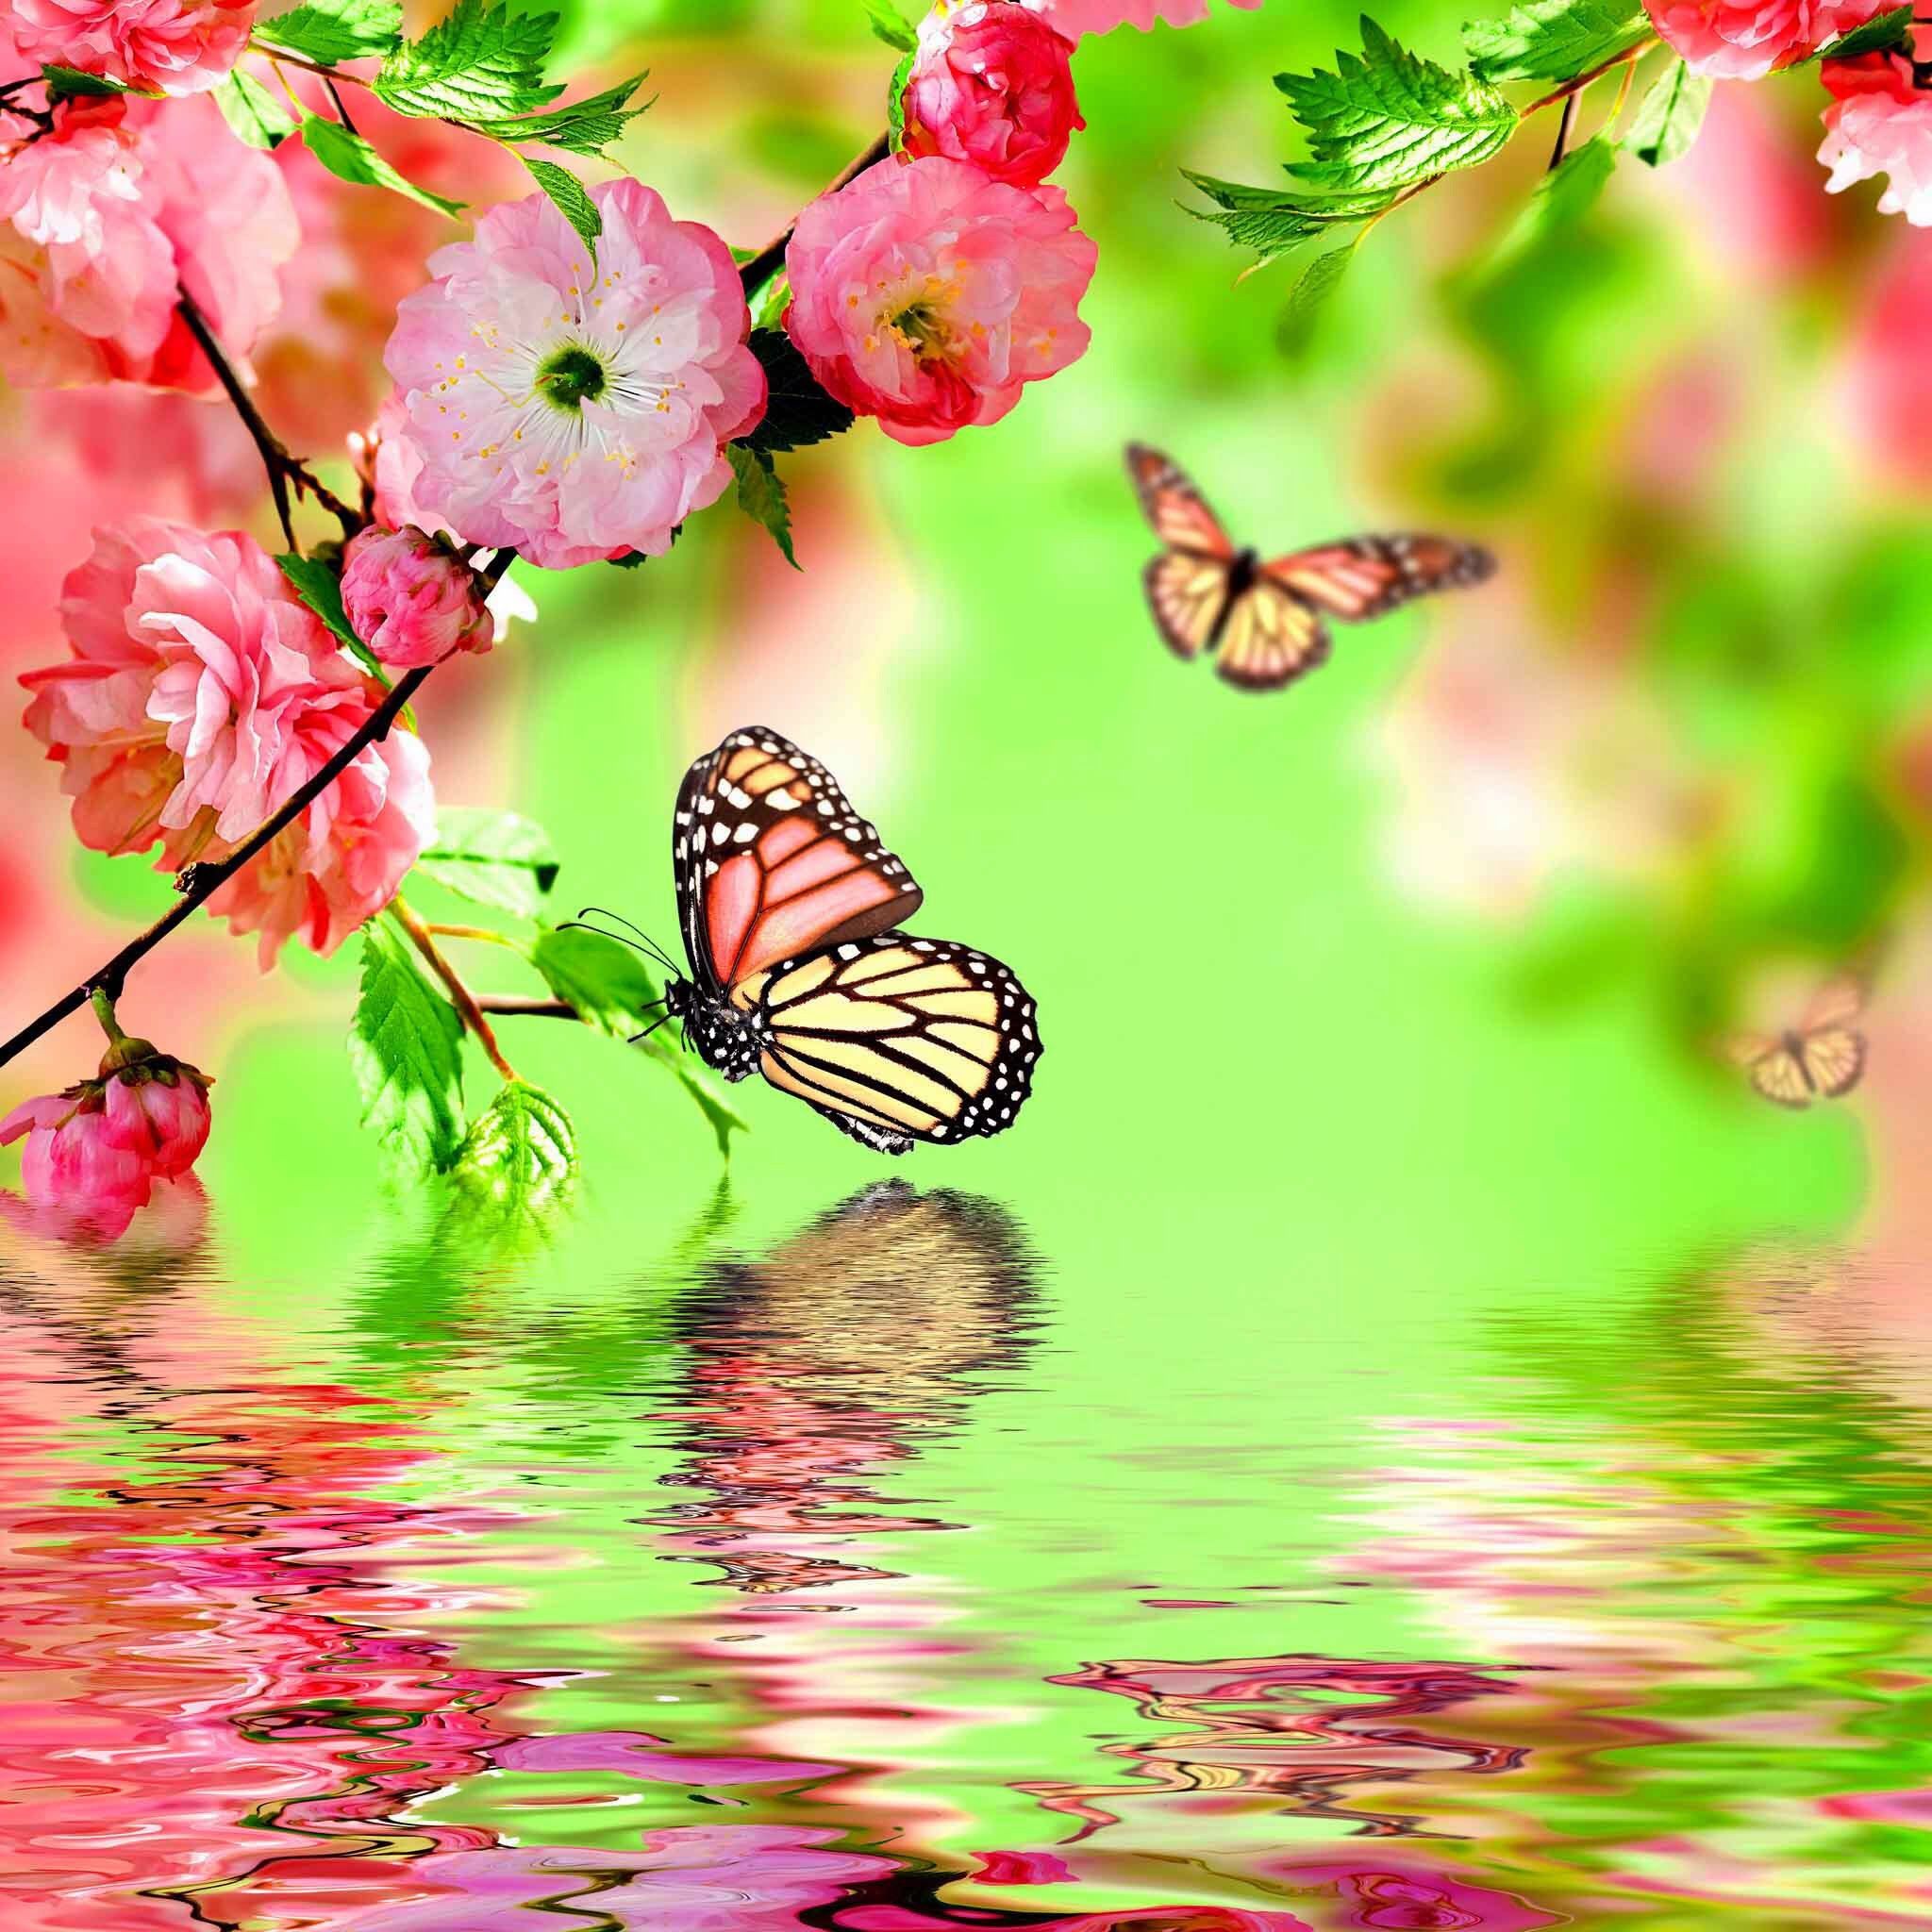 Dreams of Spring Wallpaper. Cross paintings, Butterfly wallpaper, Butterfly picture